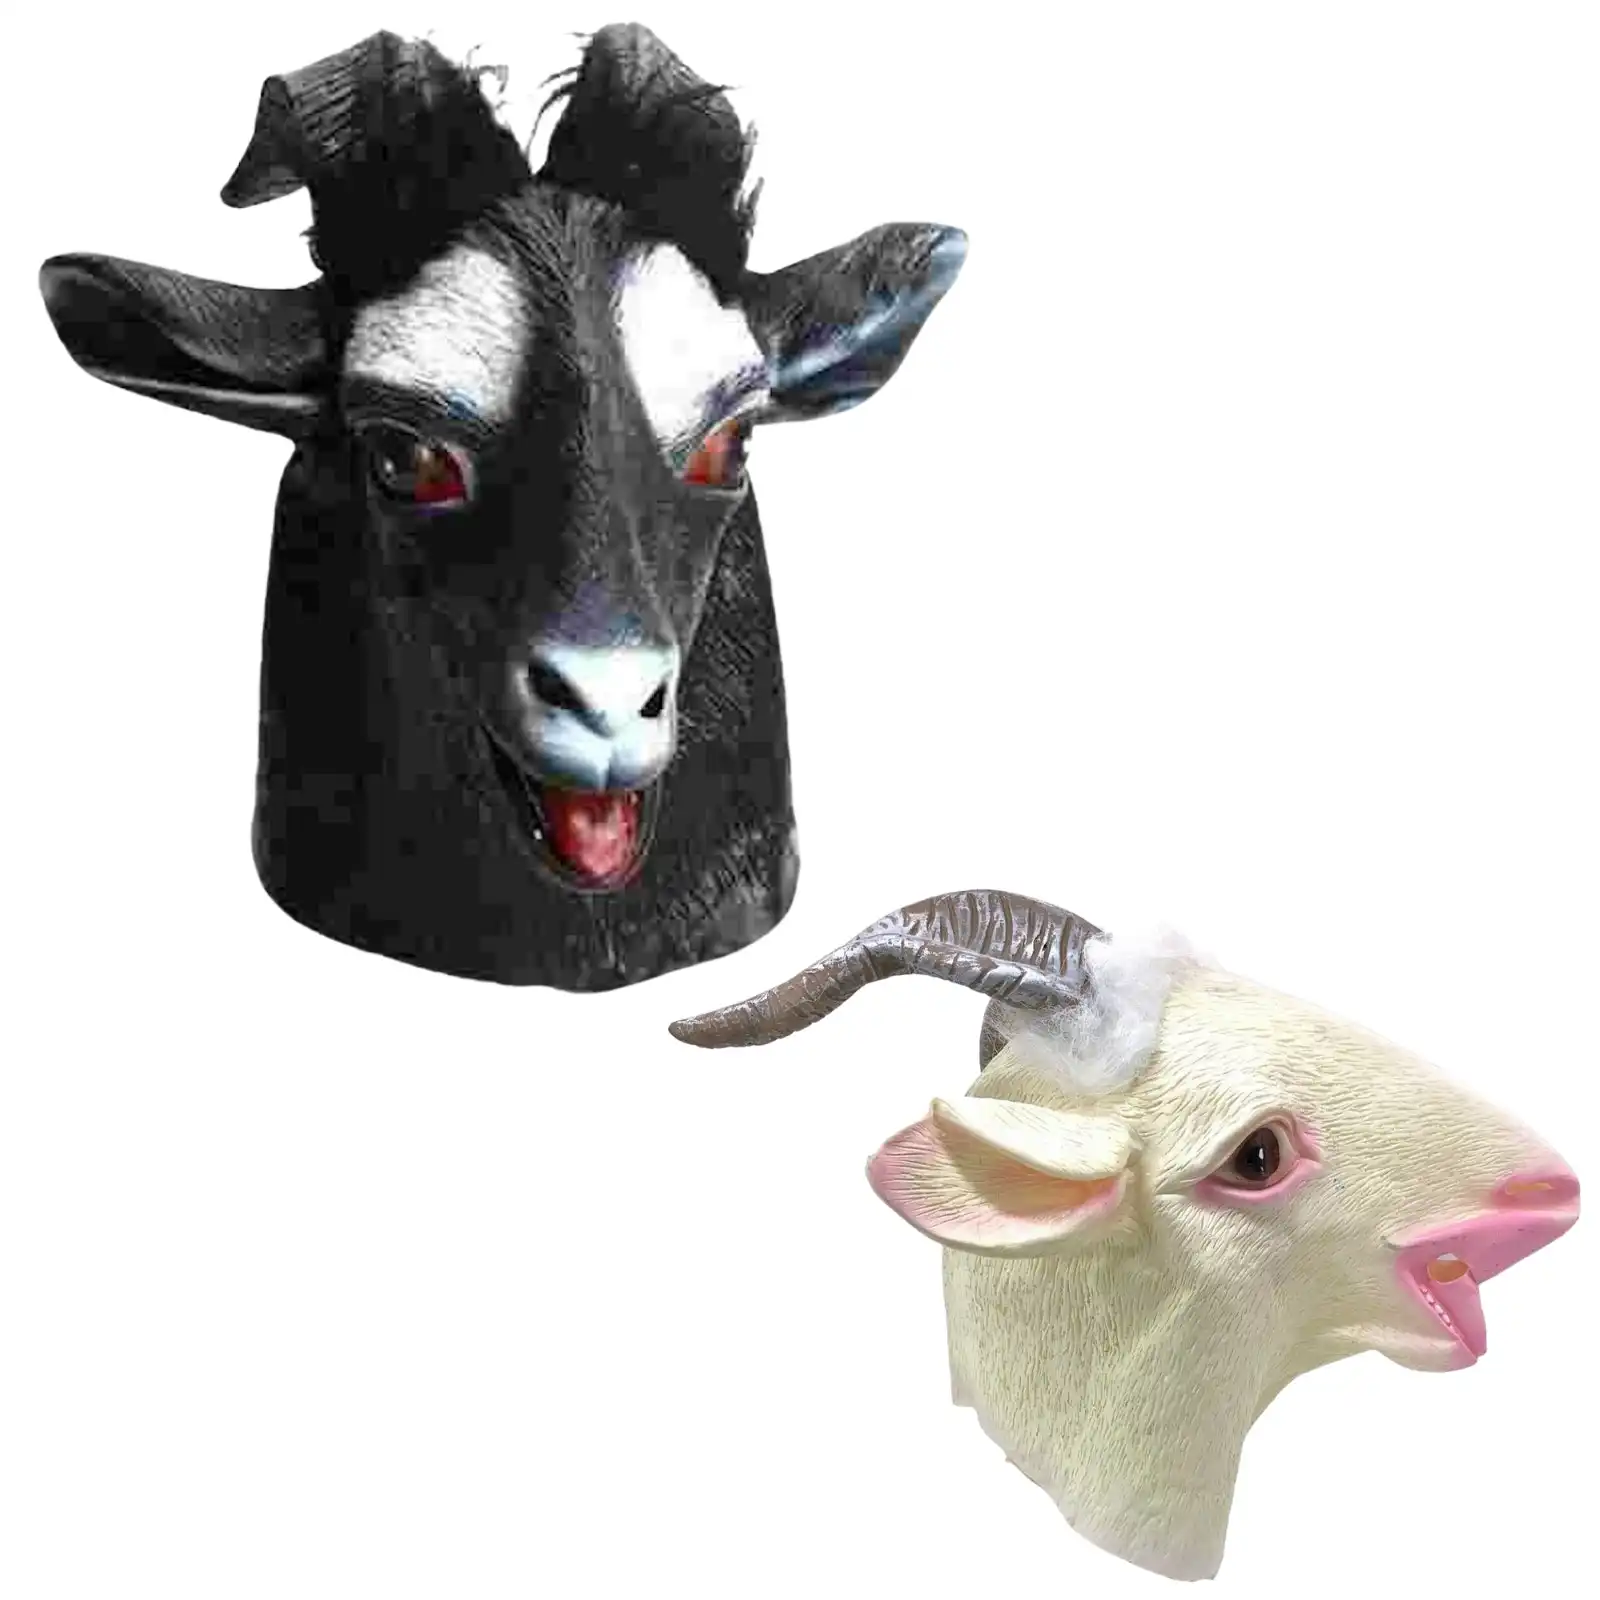 GOAT RUBBER MASK Latex Head Face Halloween Costume Party Animal Cosplay Sheep